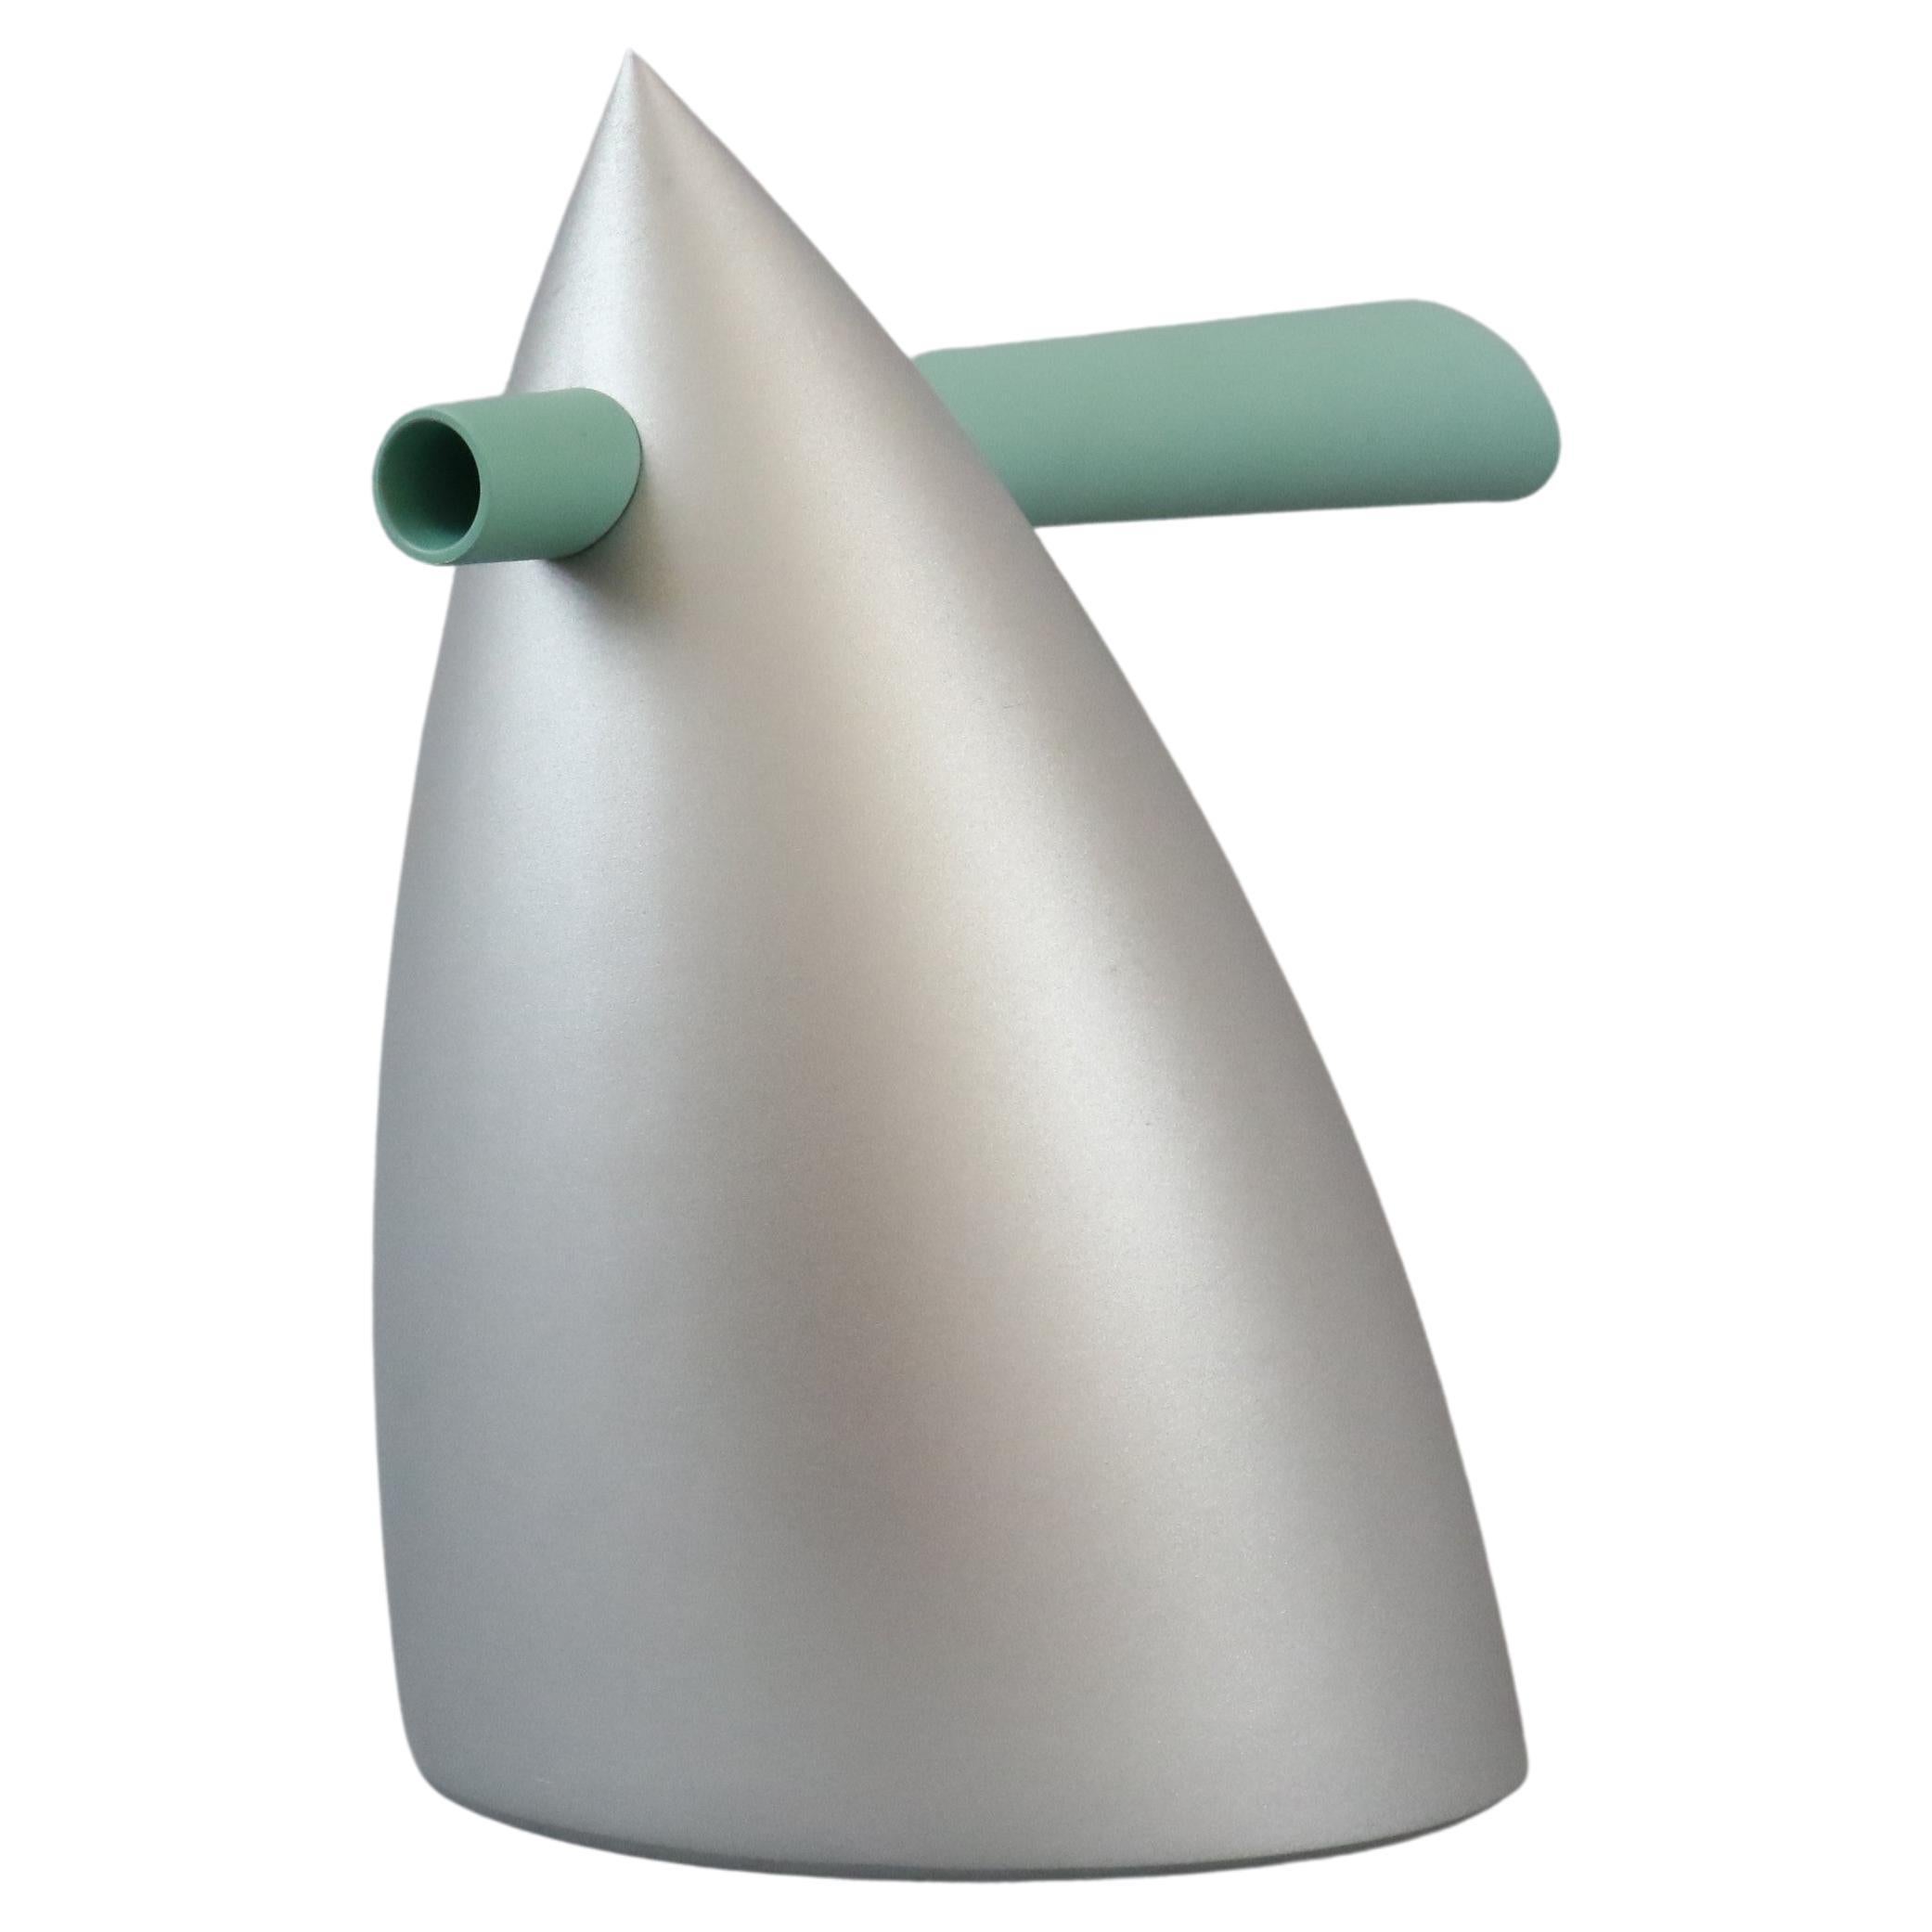 Hot Bertaa Kettle by Philippe Starck, French Design, 1987